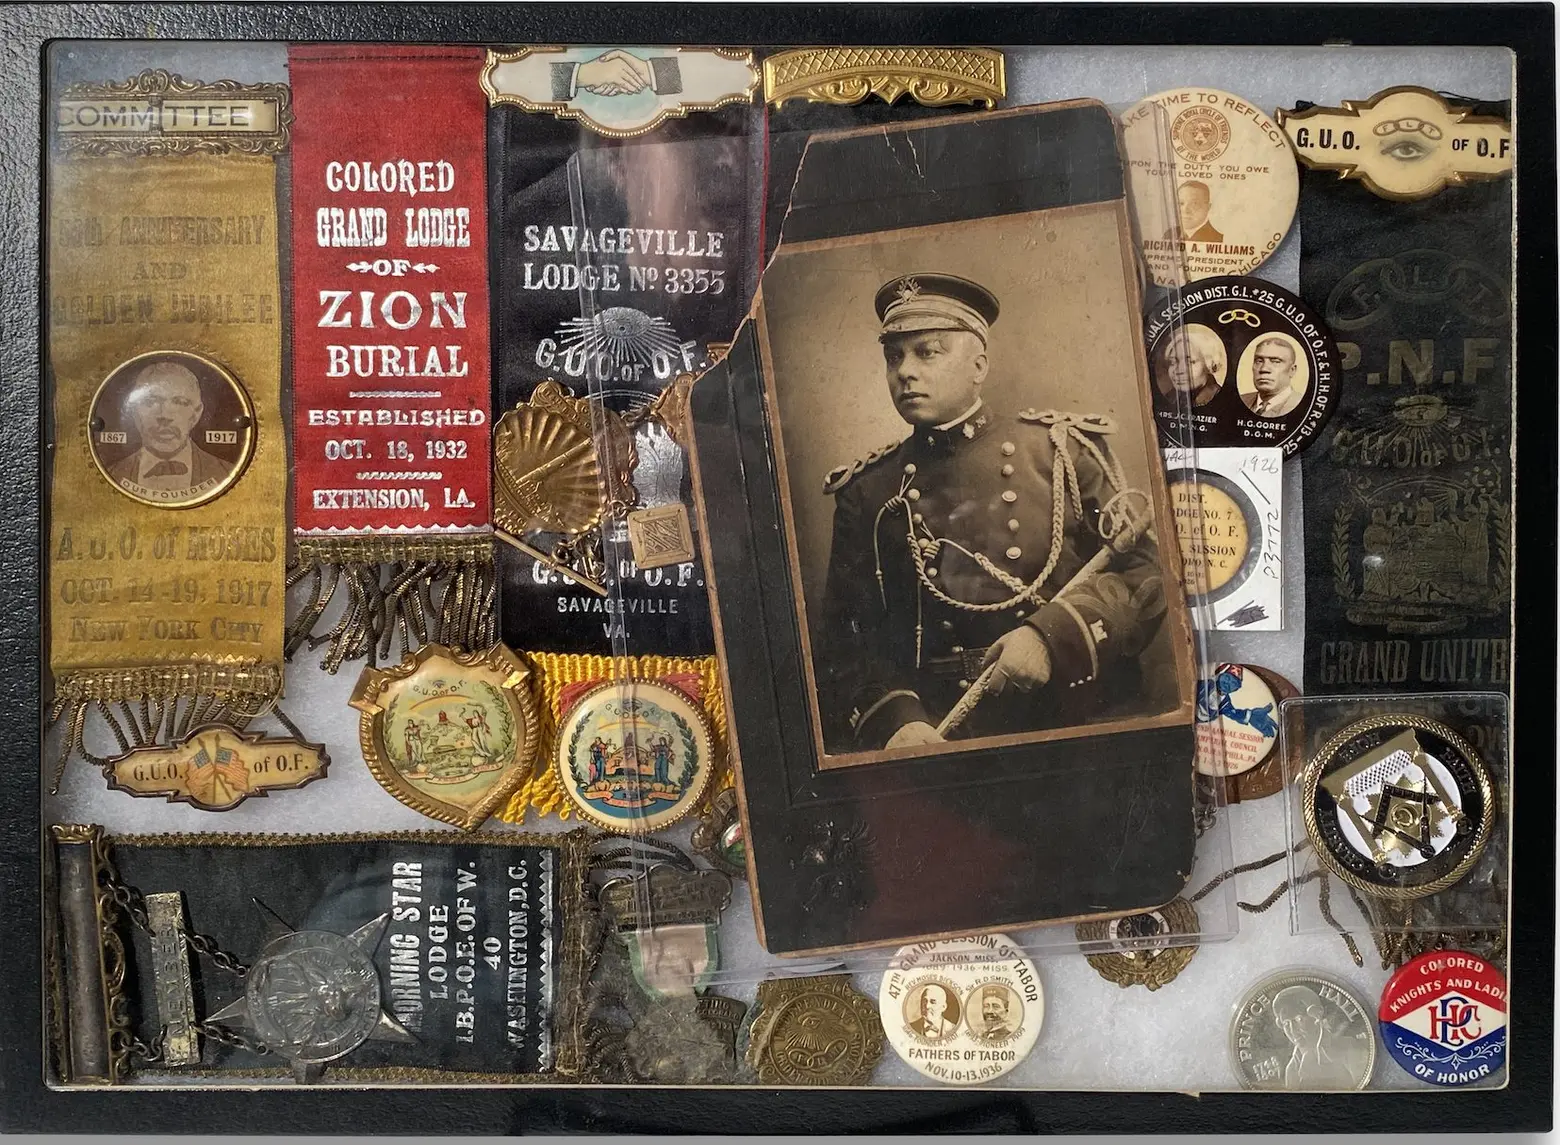 Staten Island woman’s collection of over 20,000 Black history artifacts to be auctioned